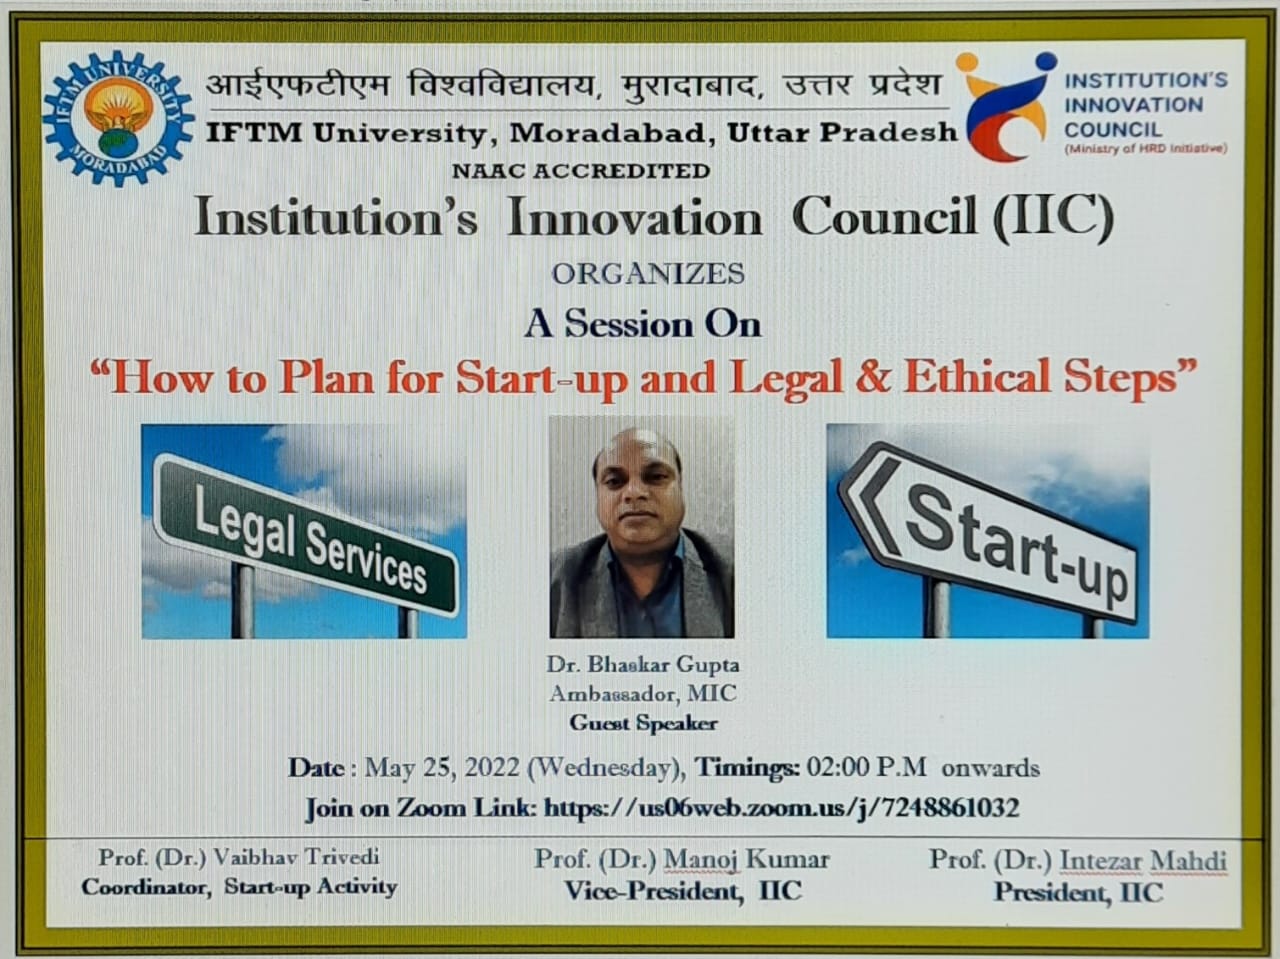 A session on: How to Plan for Start-up and Legal & Ethical Steps. 